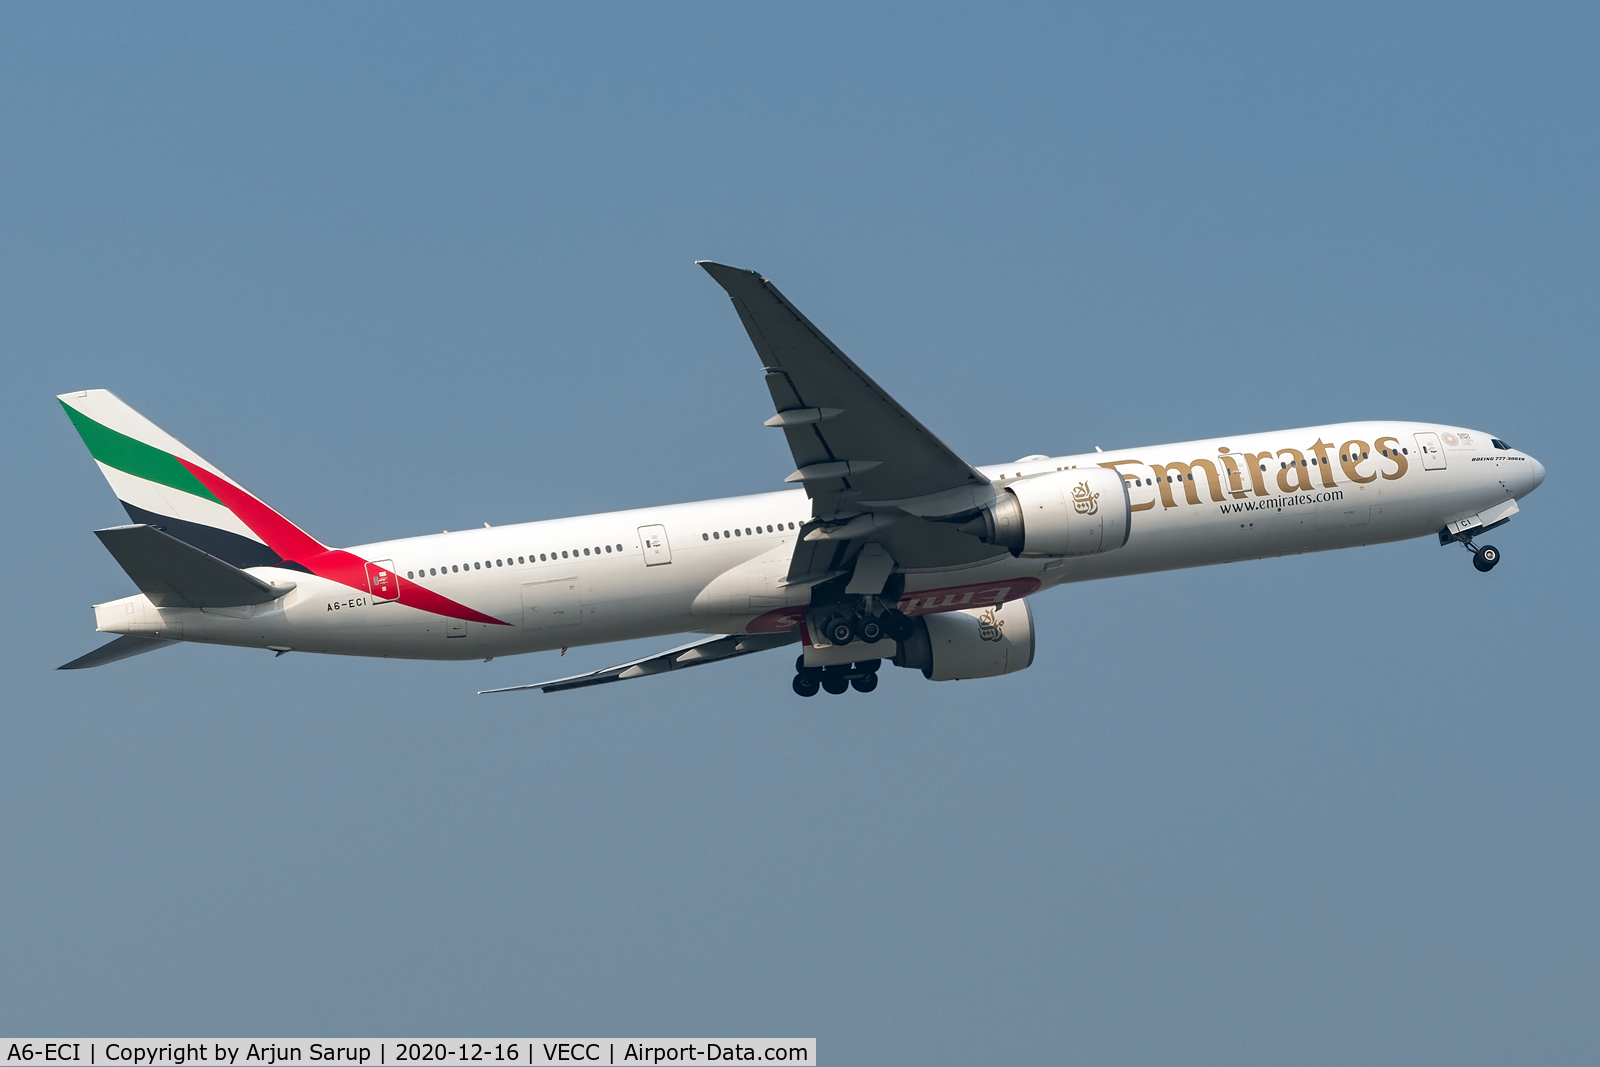 A6-ECI, 2008 Boeing 777-31H/ER C/N 35580, Morning departure from Rwy 01R at NSCBIA for EK571 bound for Dubai.